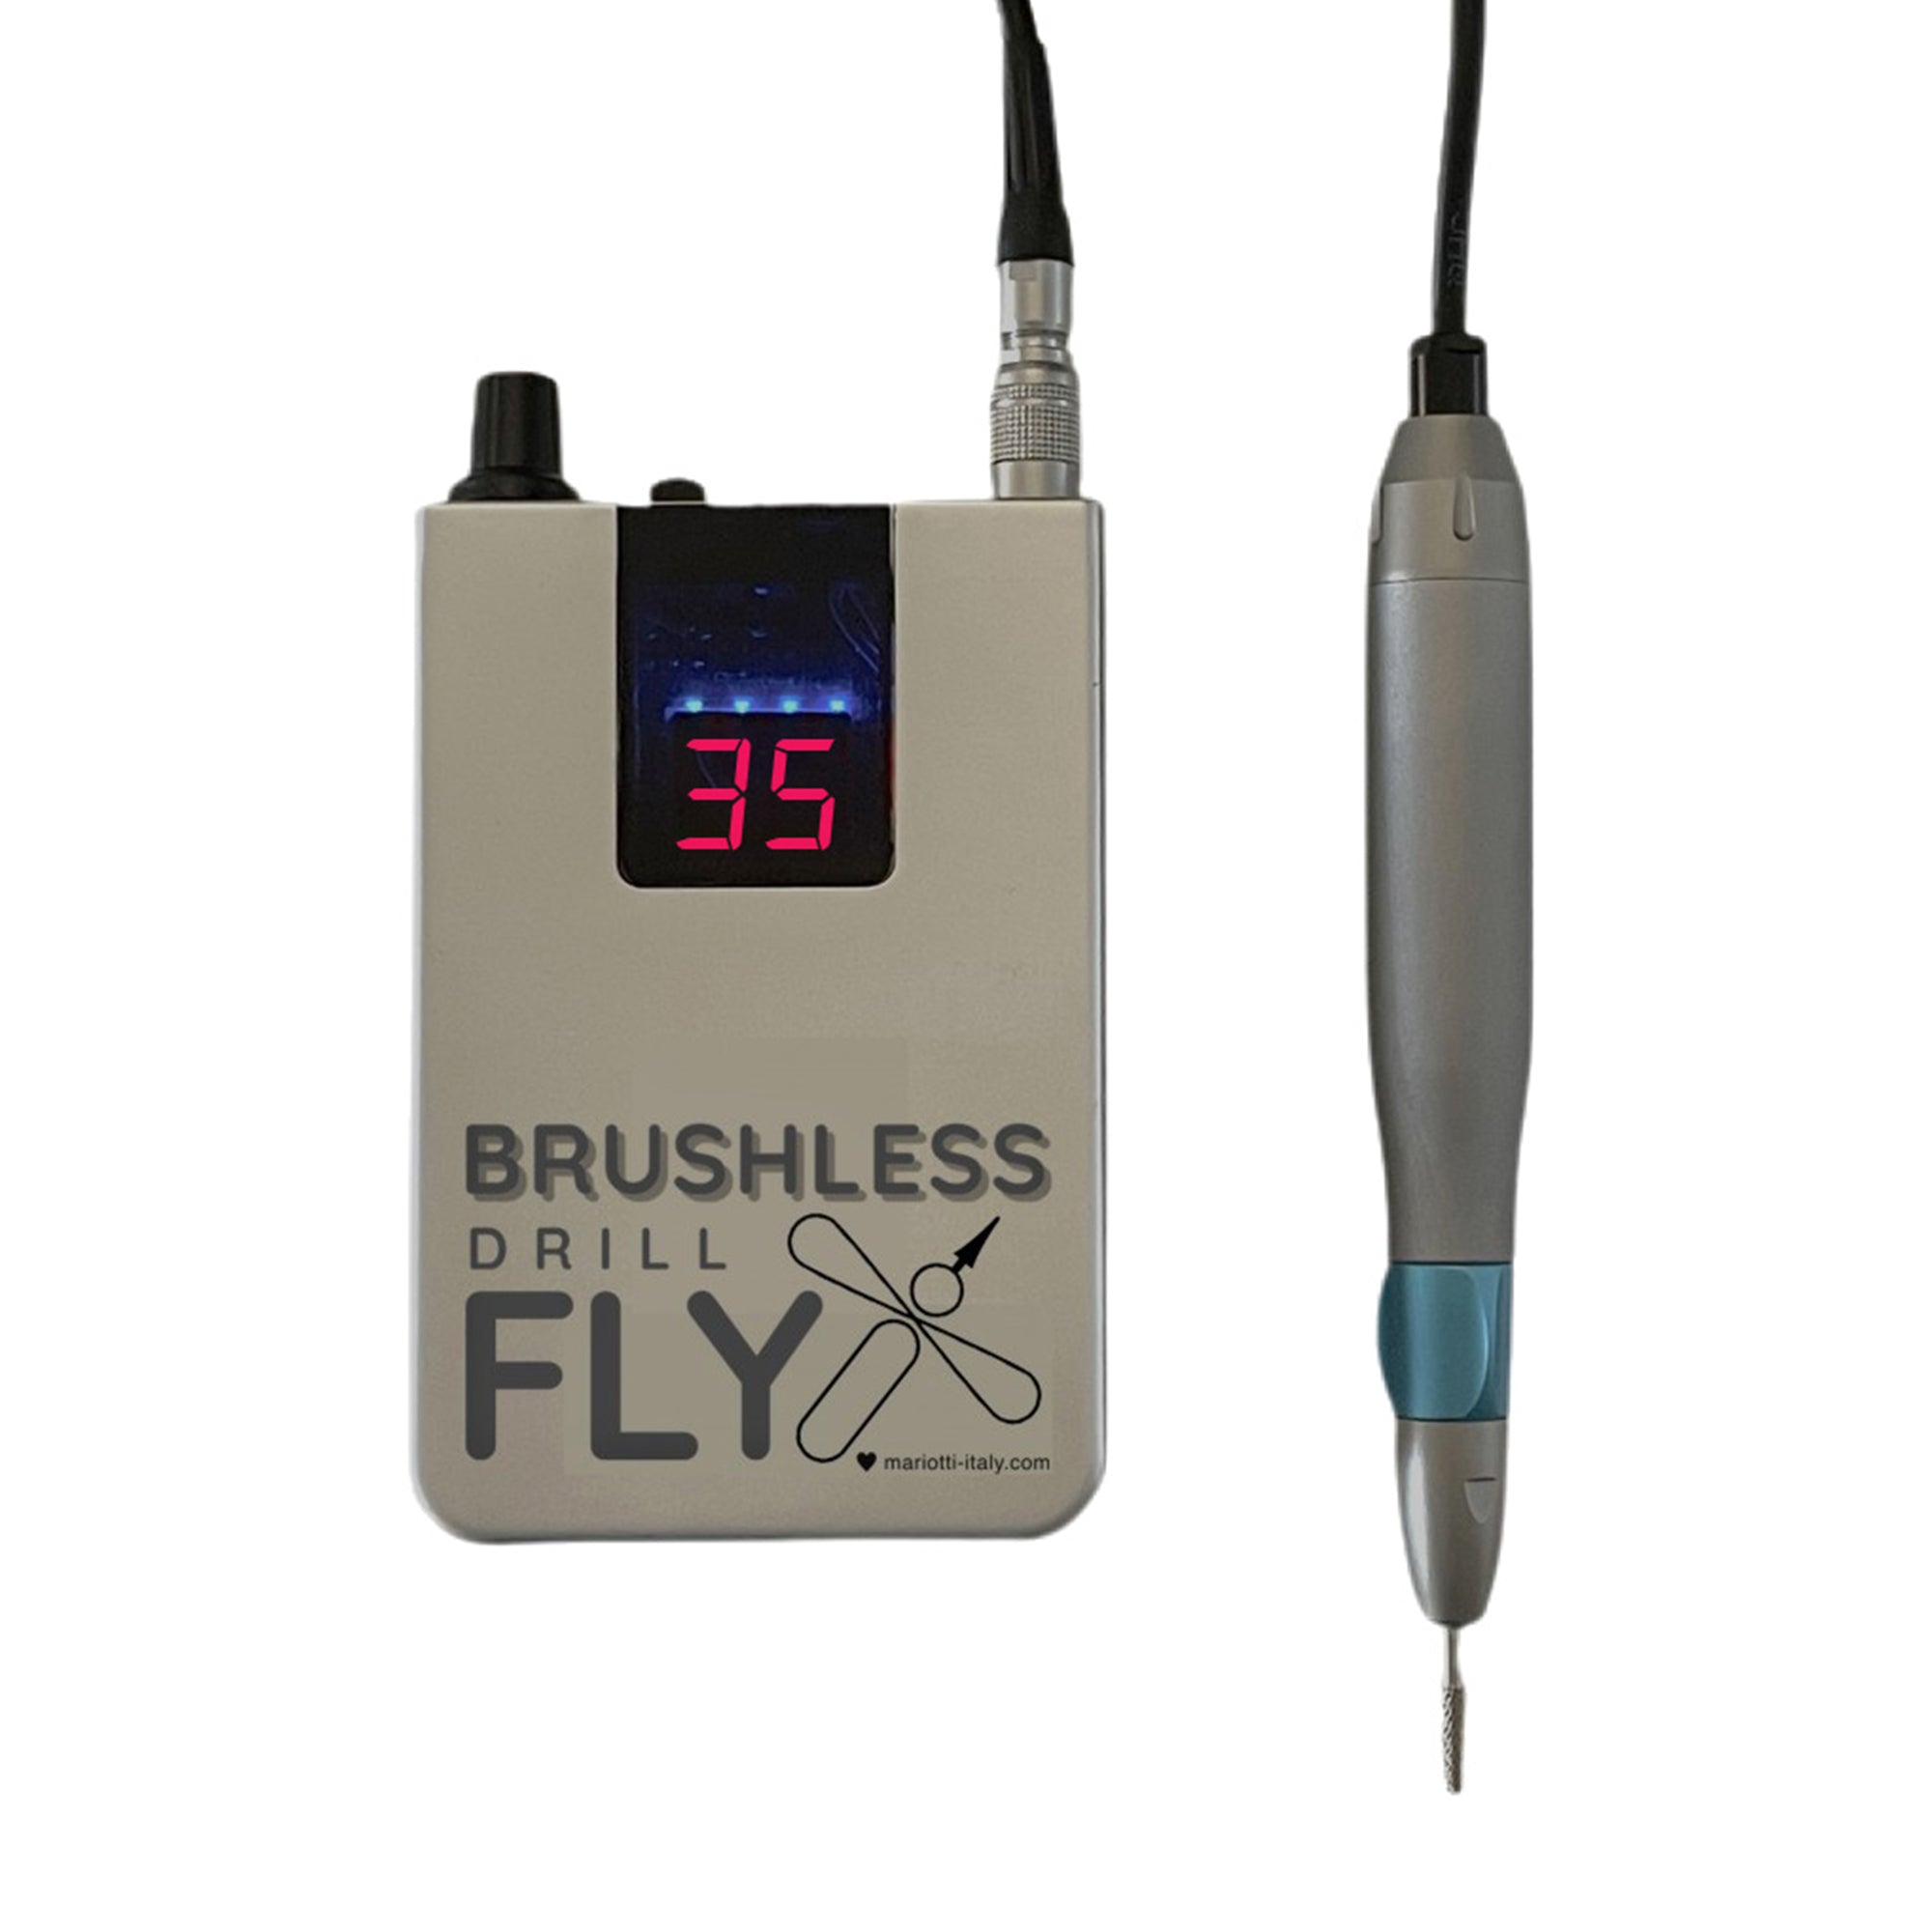 Mariotti FLY Brushless Micromotor For Dental And Podiatry Uses